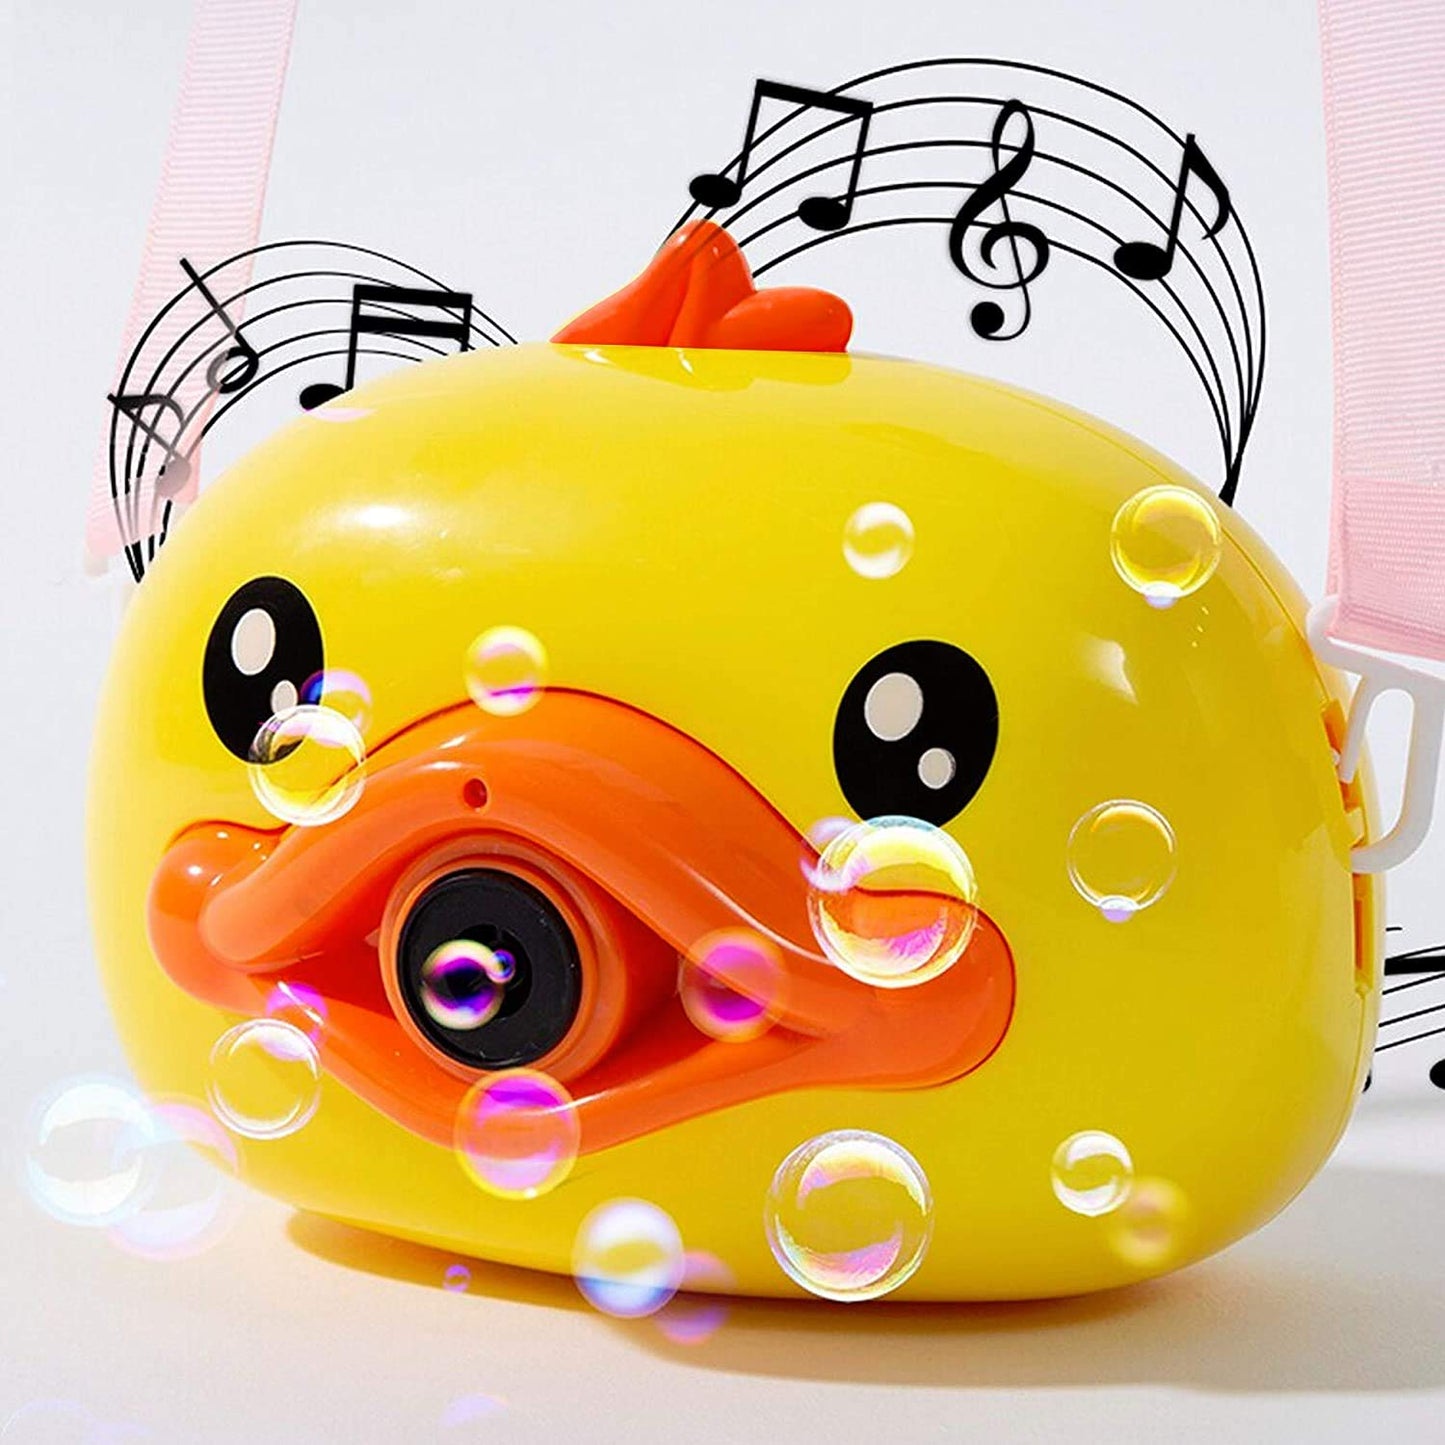 Bubble Machine Toy For Kids, Duck Bubble Camera Series, Bubble Maker Machine Camera Shape With Music And Light